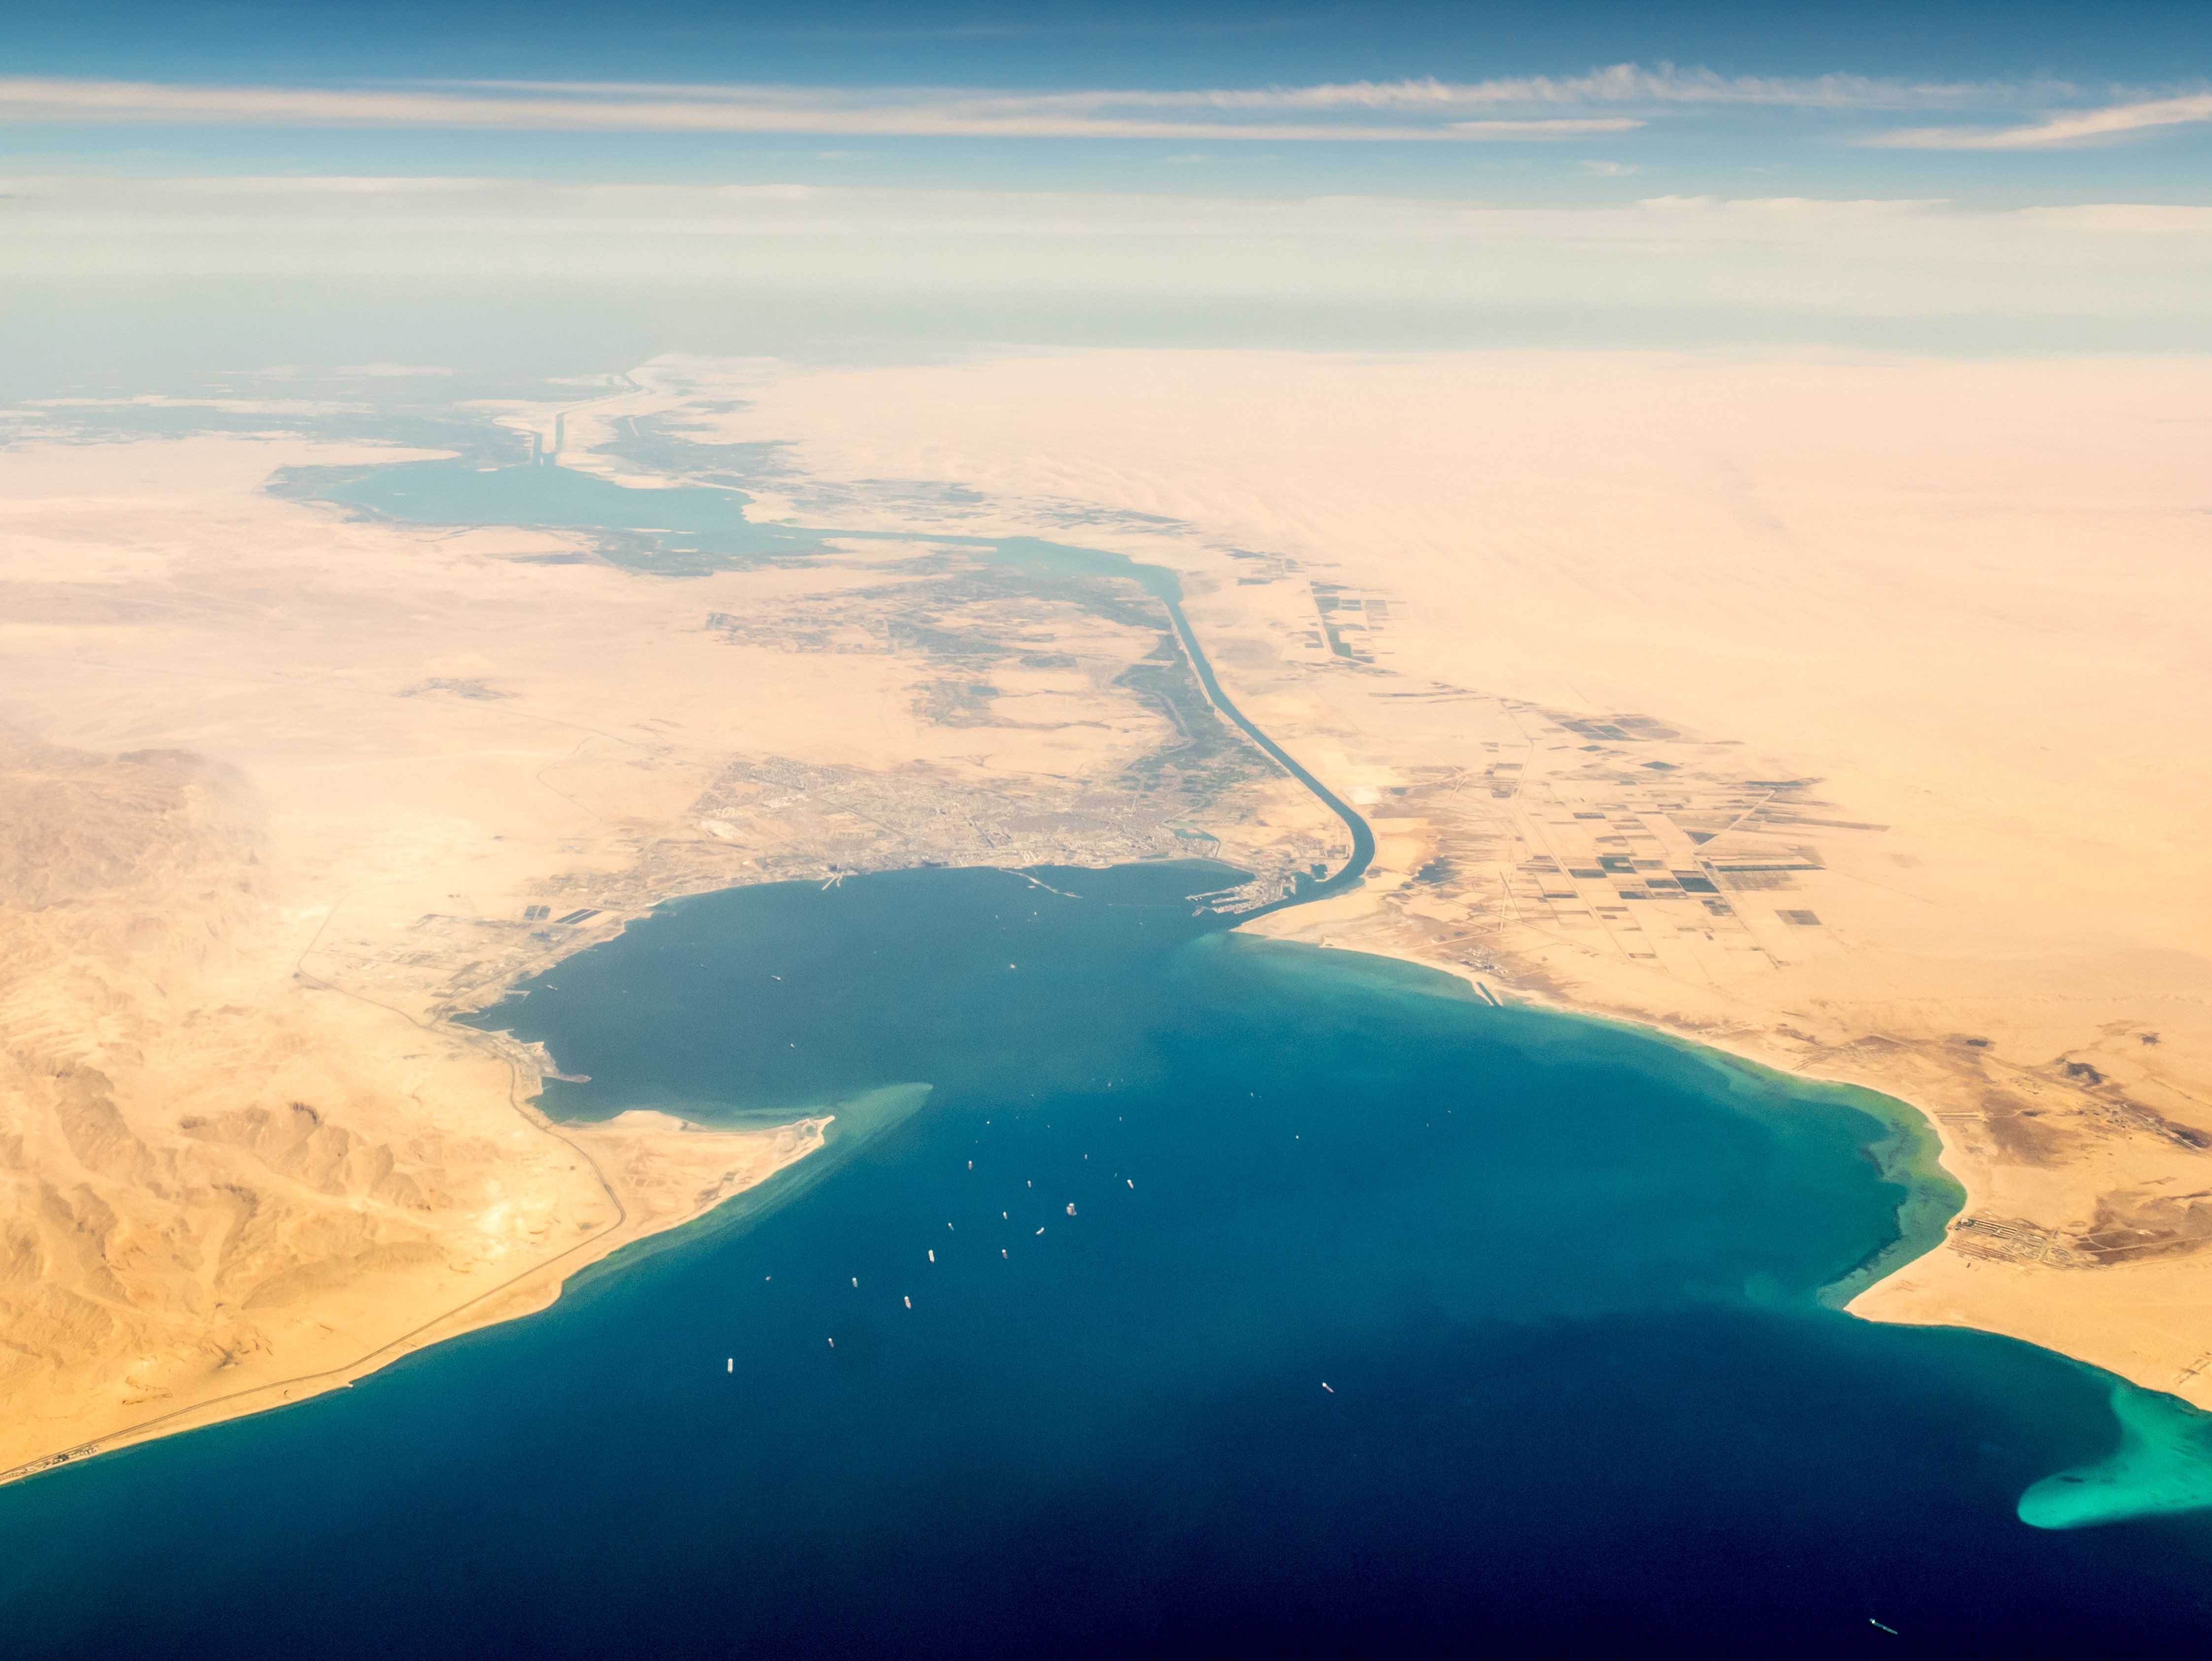 suez_canal_red_sea